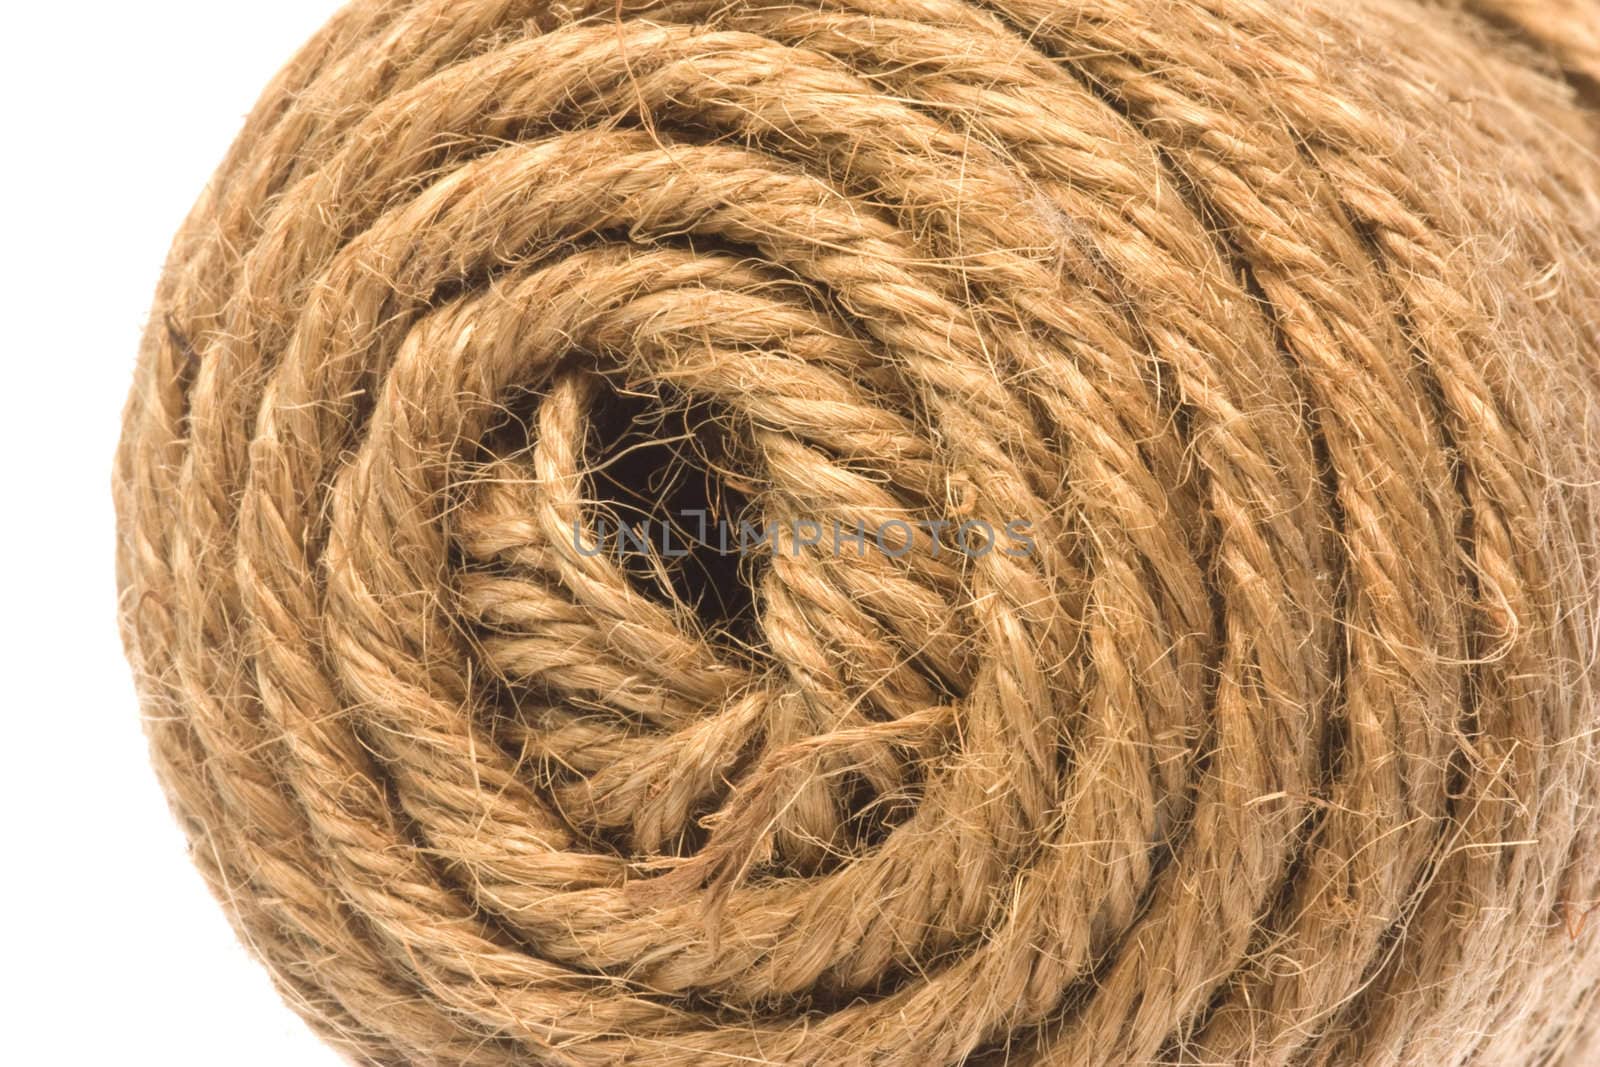 Isolated image of rope against a completely white background.